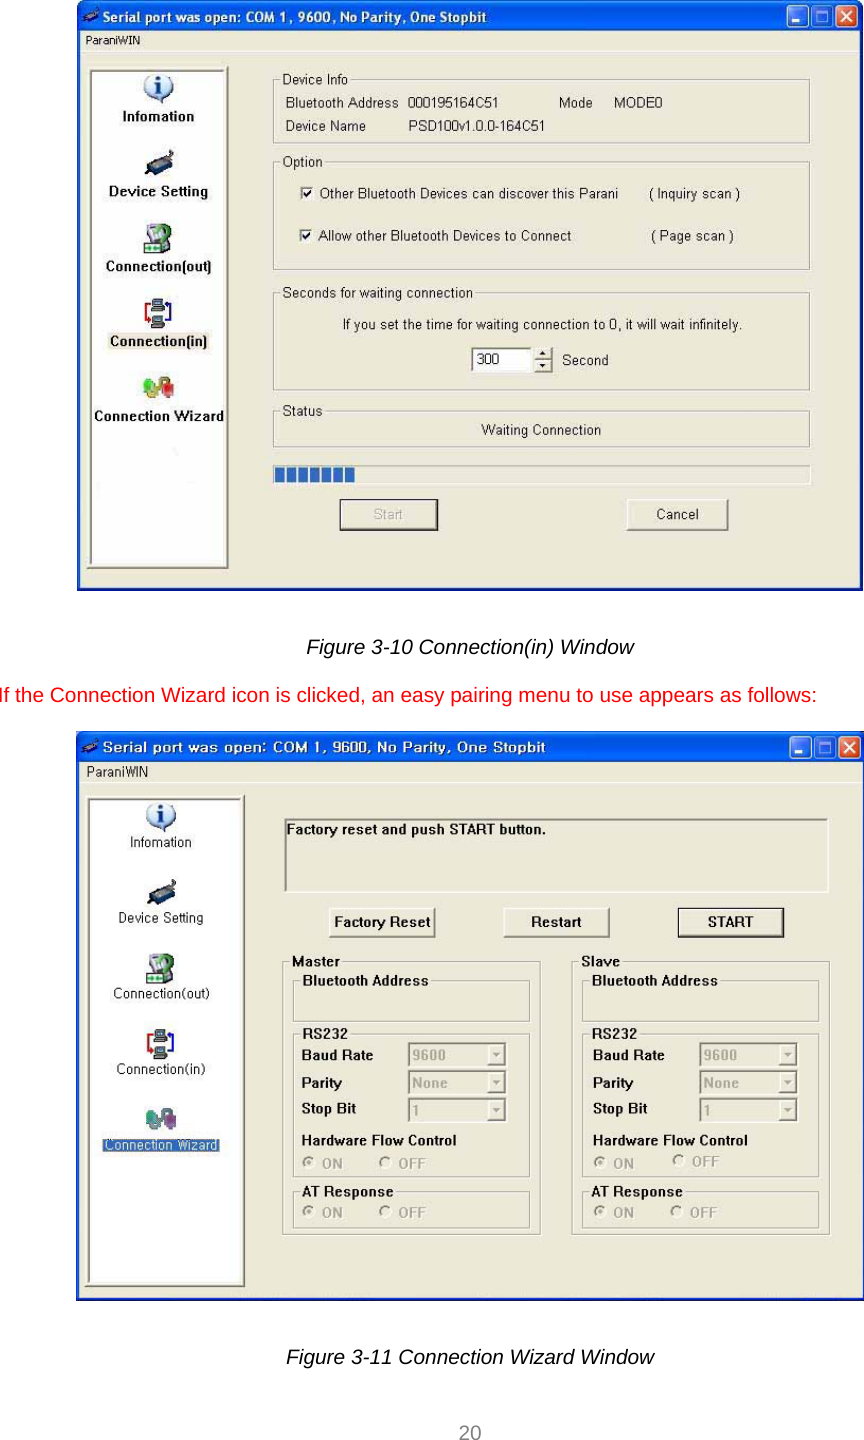  20   Figure 3-10 Connection(in) Window  If the Connection Wizard icon is clicked, an easy pairing menu to use appears as follows:    Figure 3-11 Connection Wizard Window 